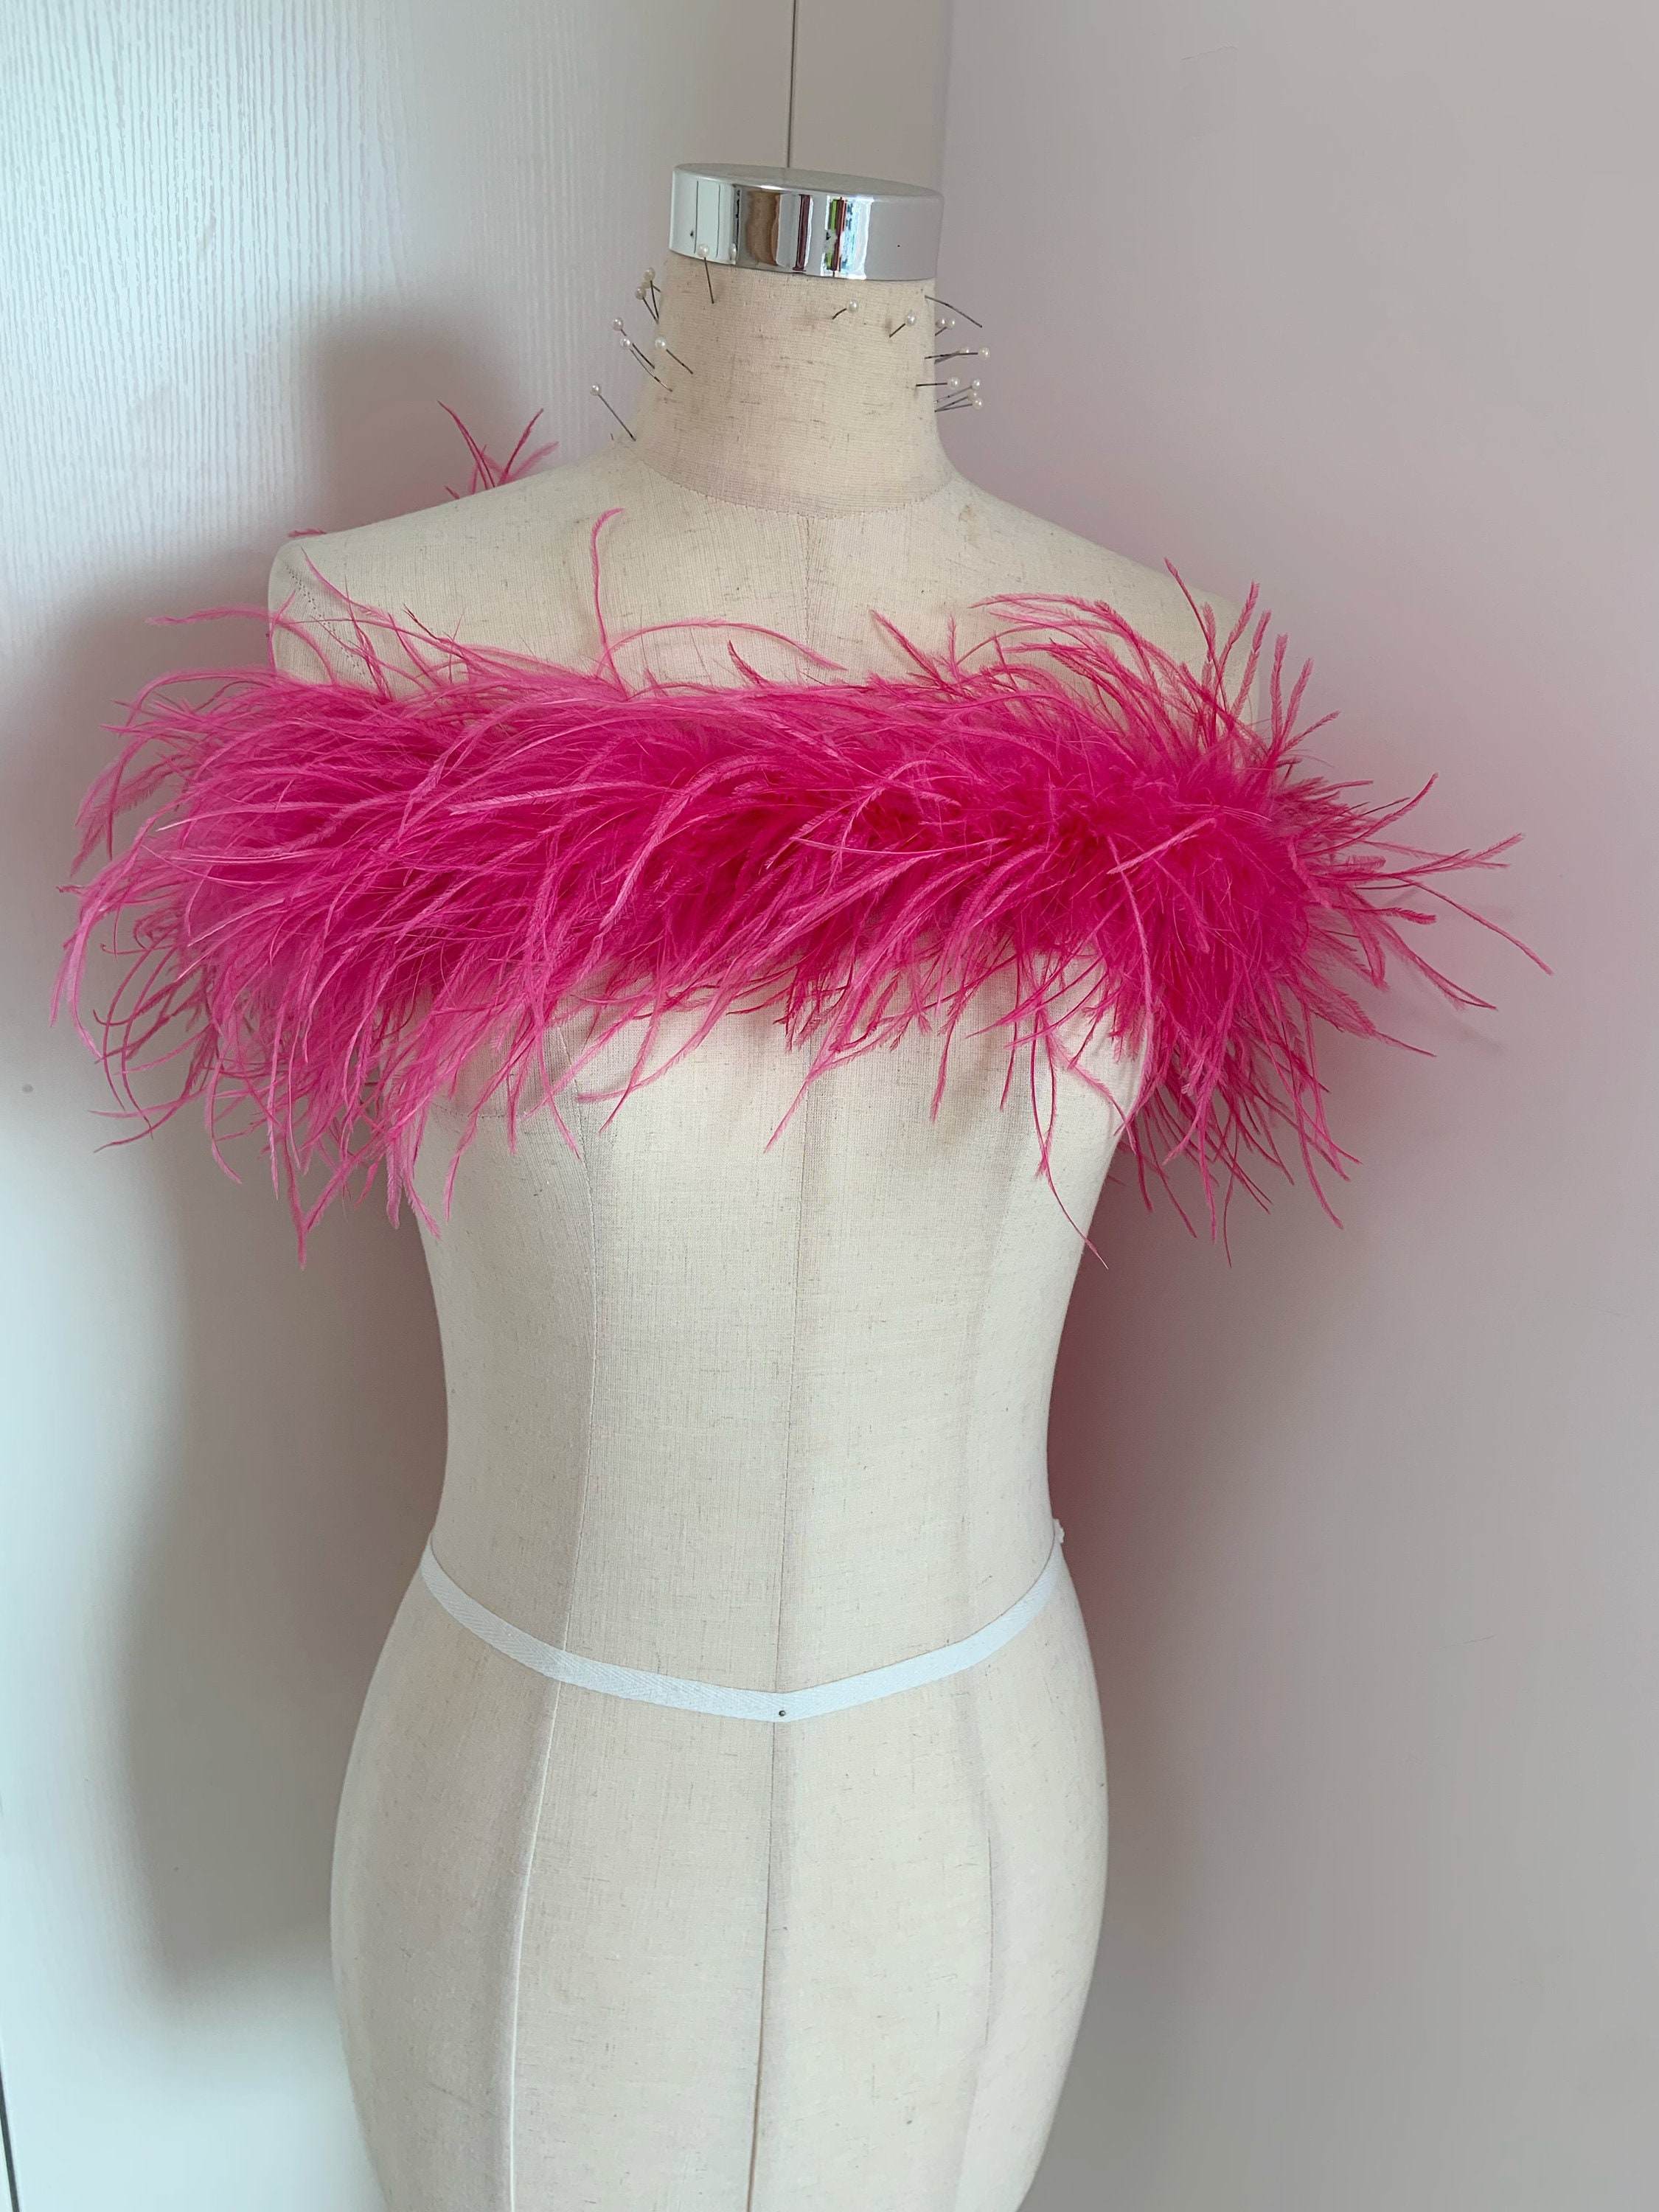 Hot Pink Turkey Feather Boa 55GM 6 ft 72 Costume Accessory Bachlorette  Party